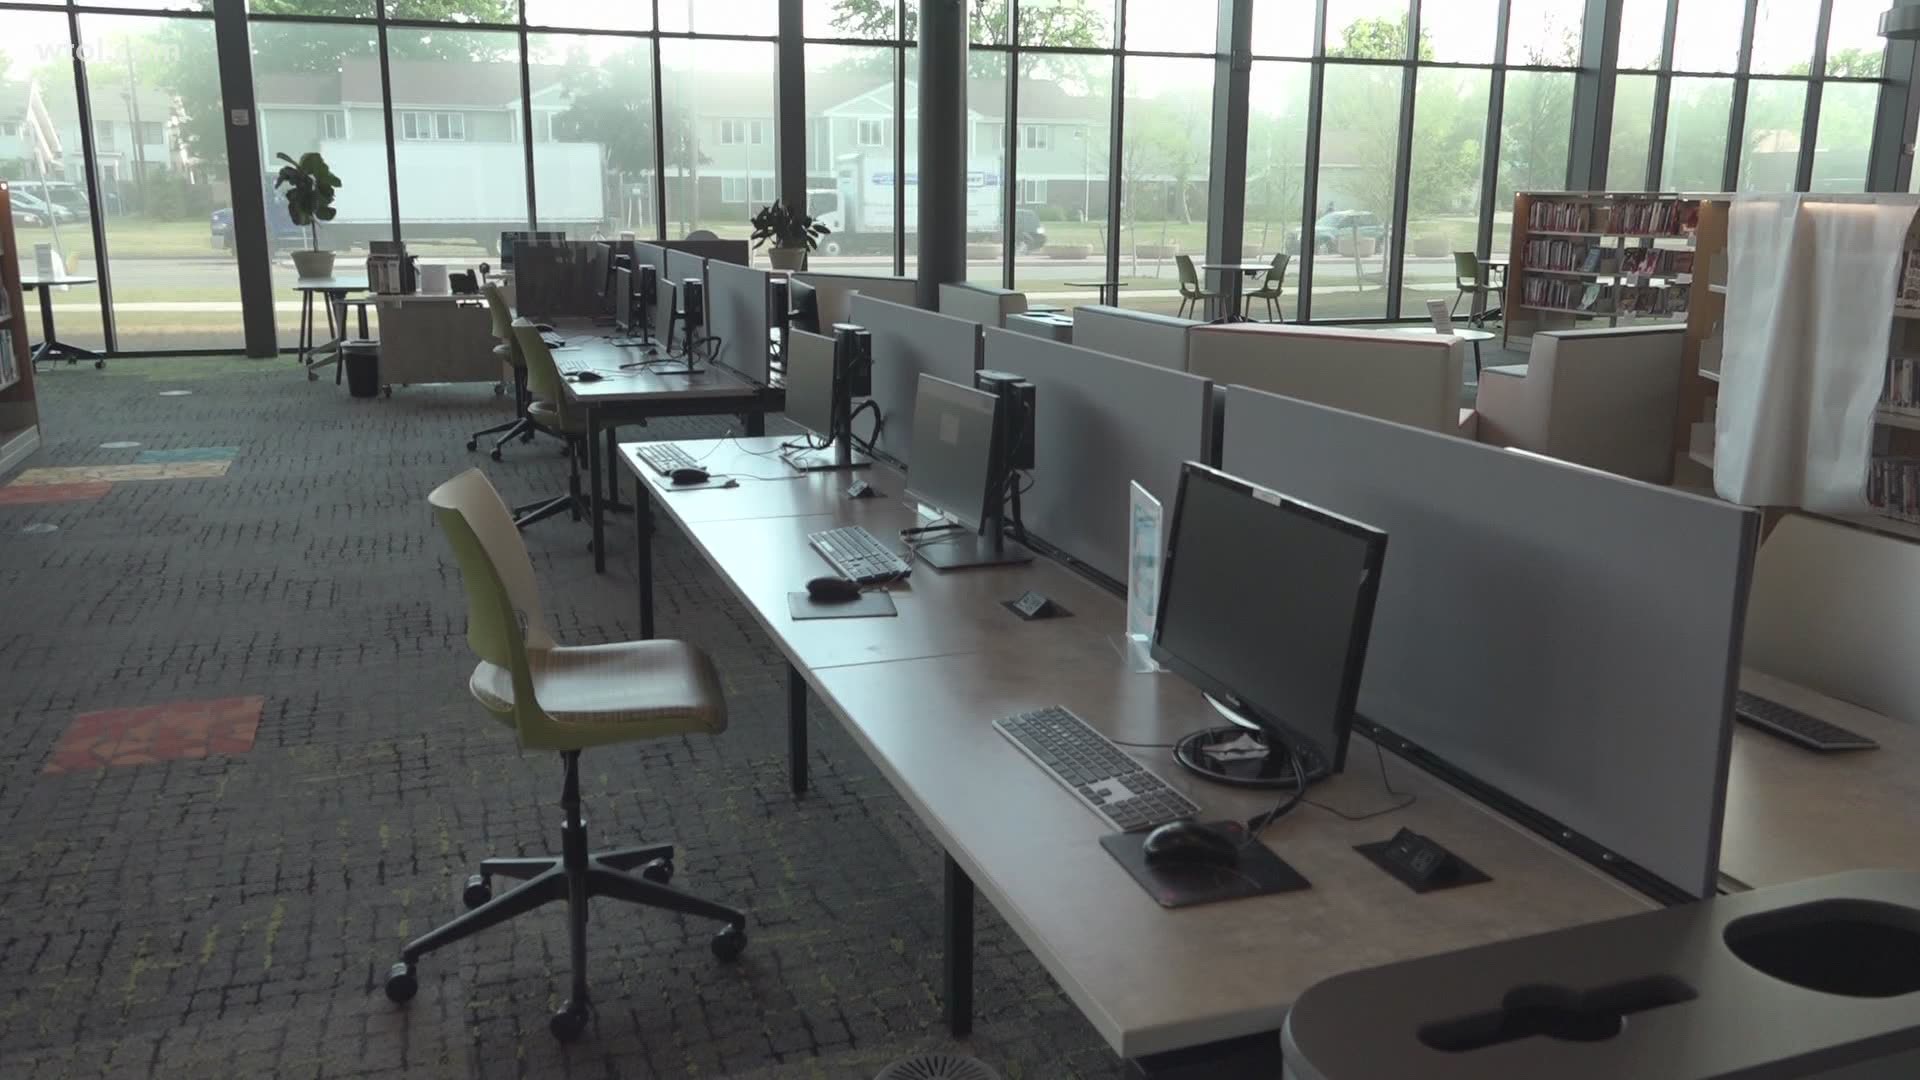 The Toledo Lucas County Public Library continues its slow reopening in phases, with phase 3 starting June 22 allowing for computer access at five locations.